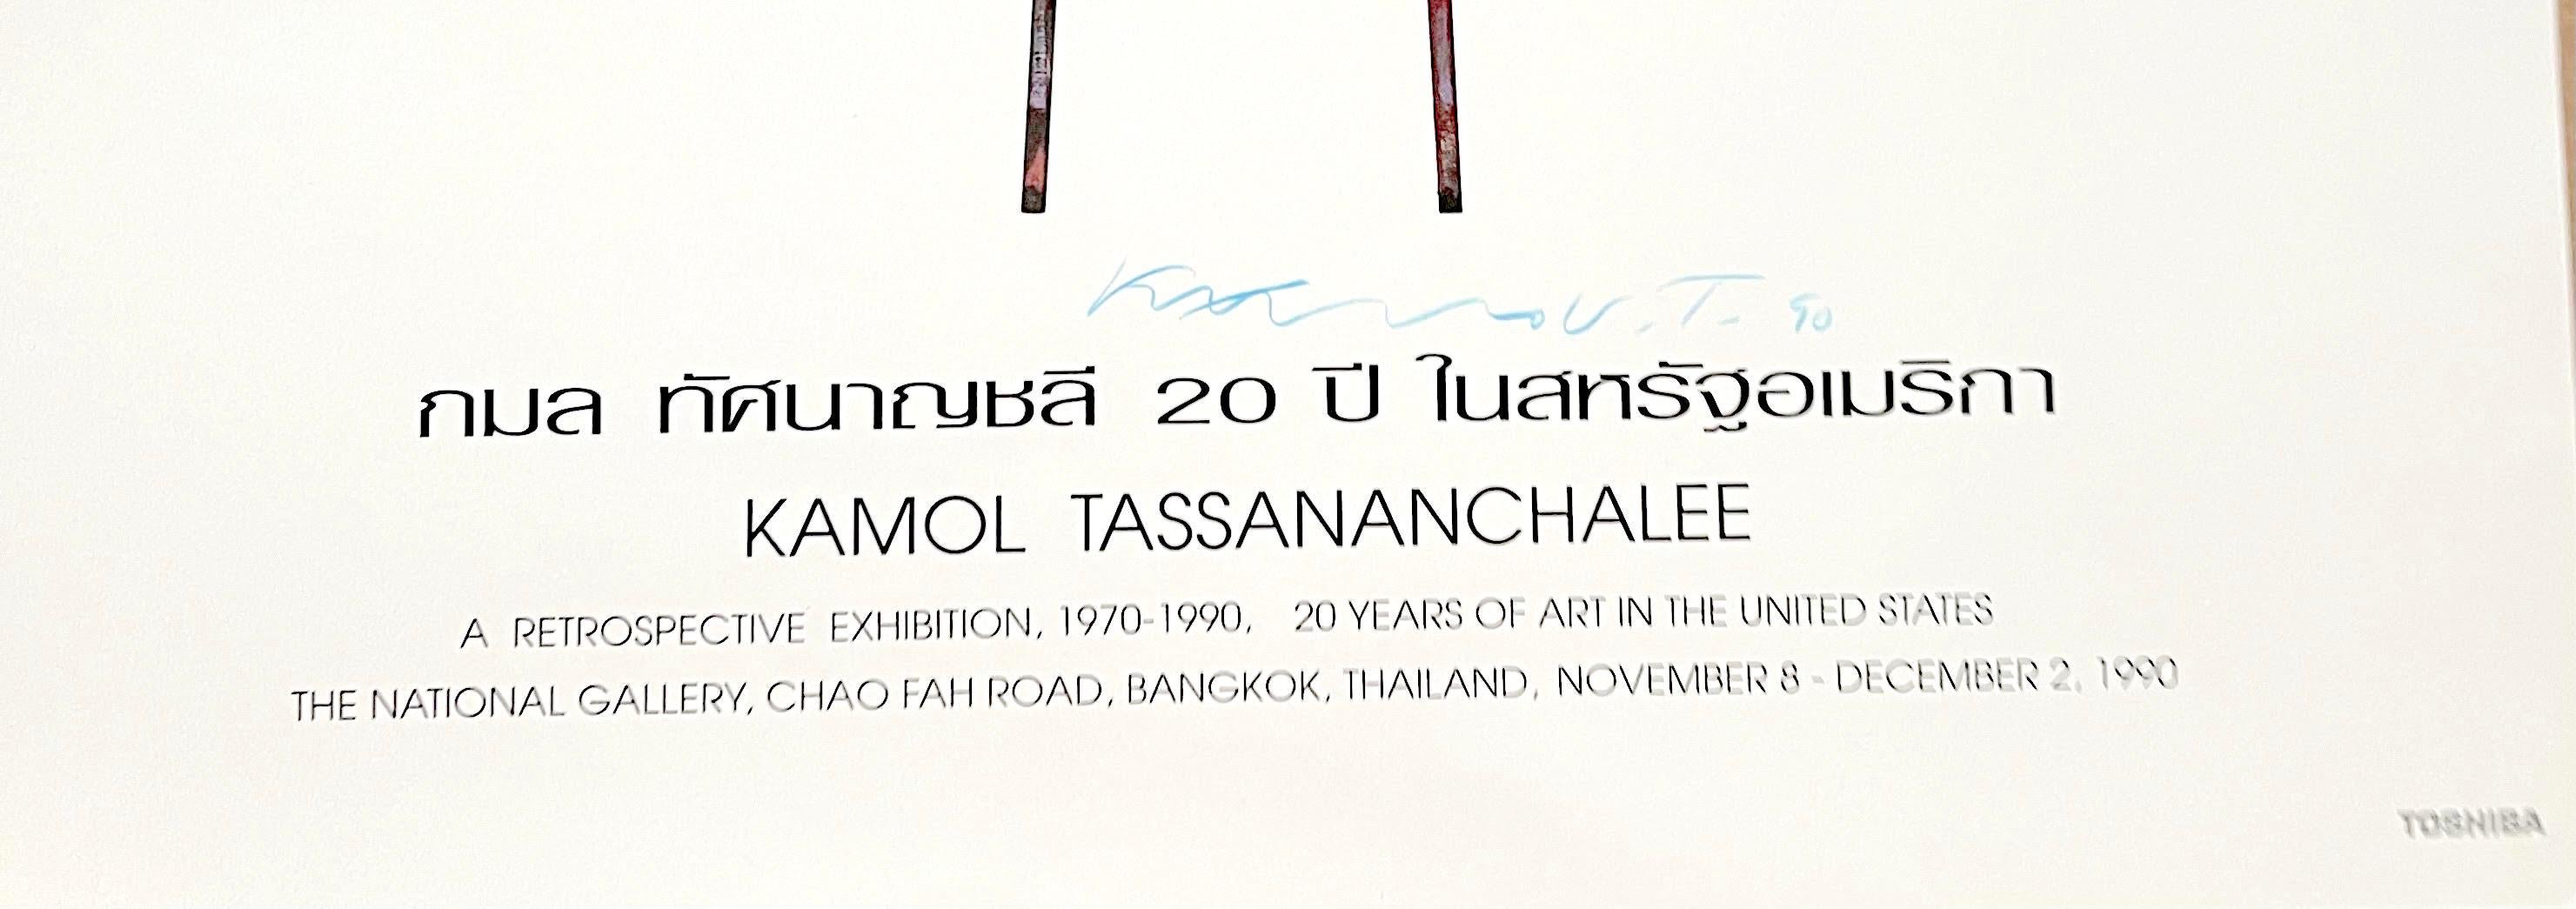 Kamol Tassananchalee
Retrospective exhibition poster The National Gallery, Thailand (Hand signed), 1990
Offset lithograph poster 
Hand signed and dated by Kamol Tassananchalee in blue crayon on the front
28 × 23 inches
Unframed
The poster was